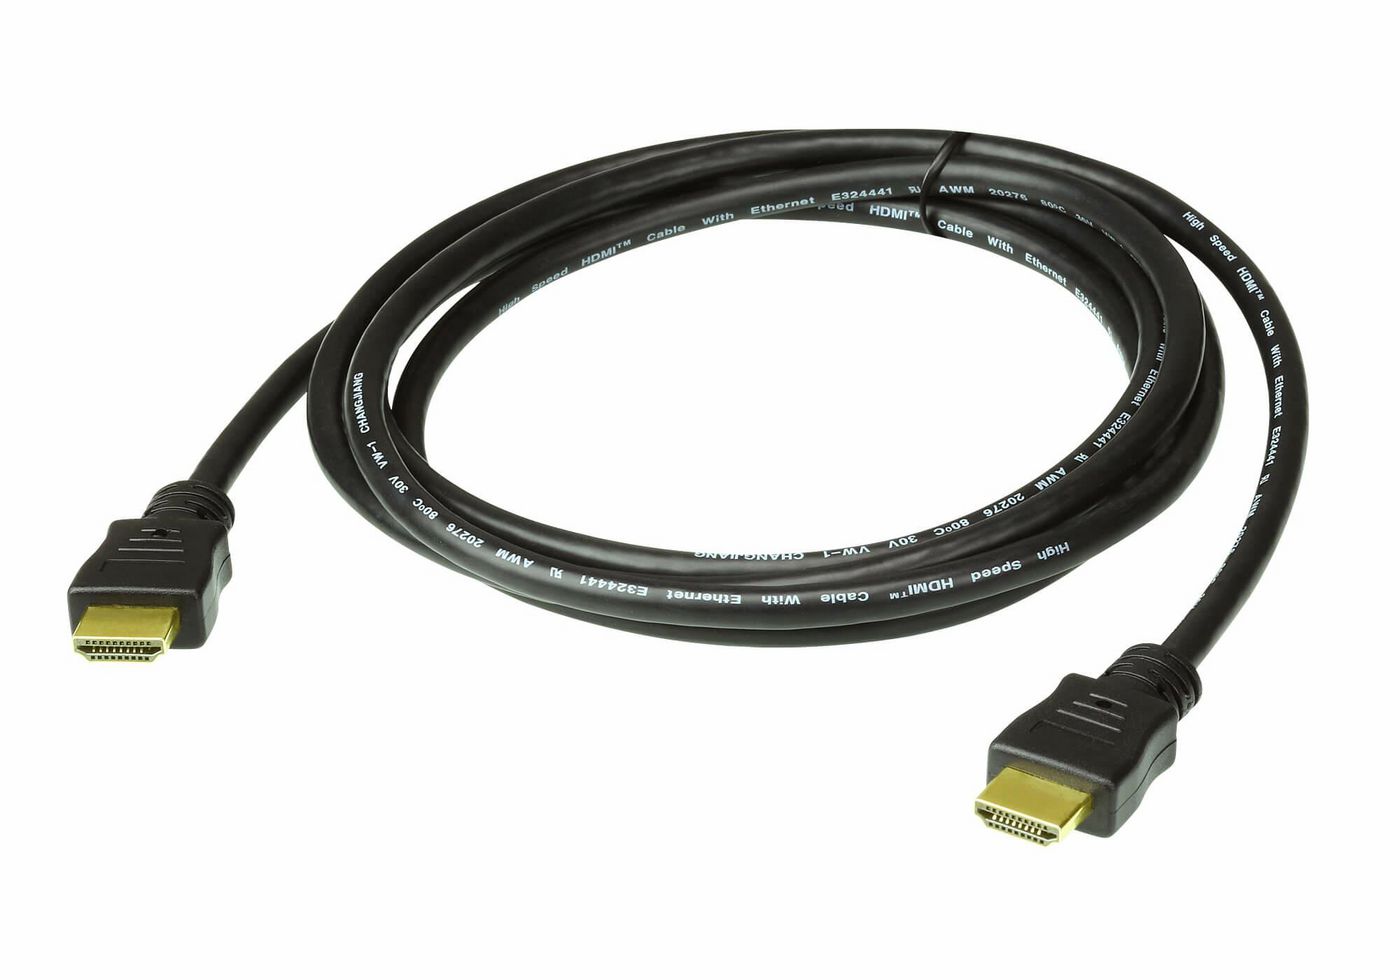 Aten 2L-7D02H-1 High Speed HDMI Cable with 